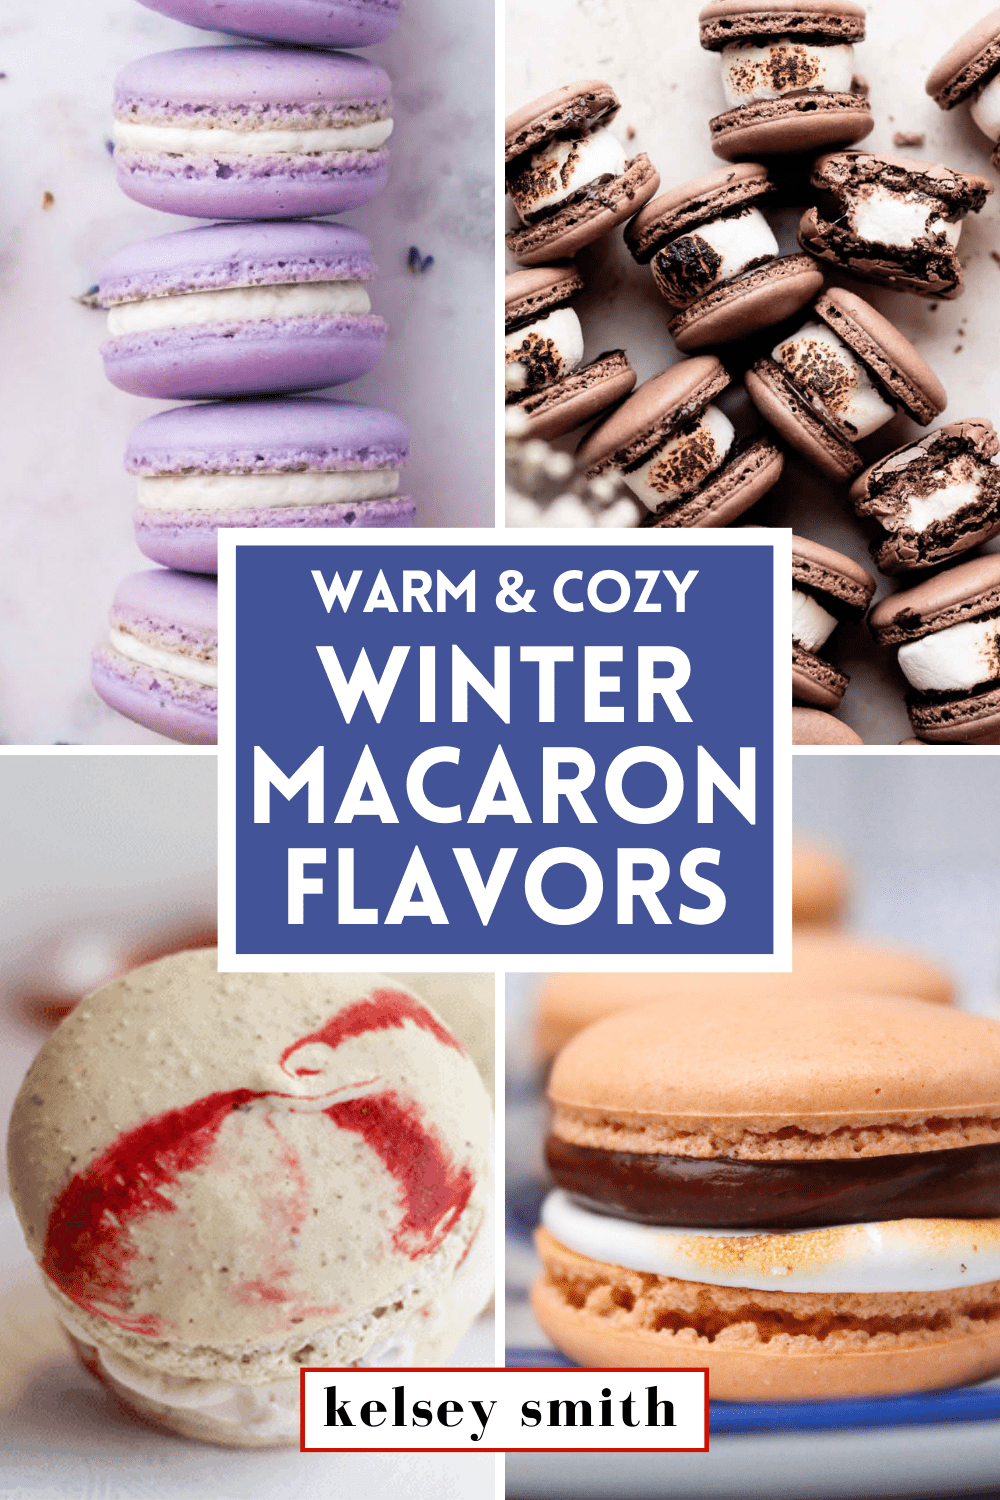 Four images in a grid. The top left image is three lavendar macarons stacked. The top right image shows several chocolate macarons on their side to show a toasted marshmallow filling. The bottom left image is a peppermint swirl macaron. The bottom right image is a s'mores macaron with ganache and marshmallow fluff filling.